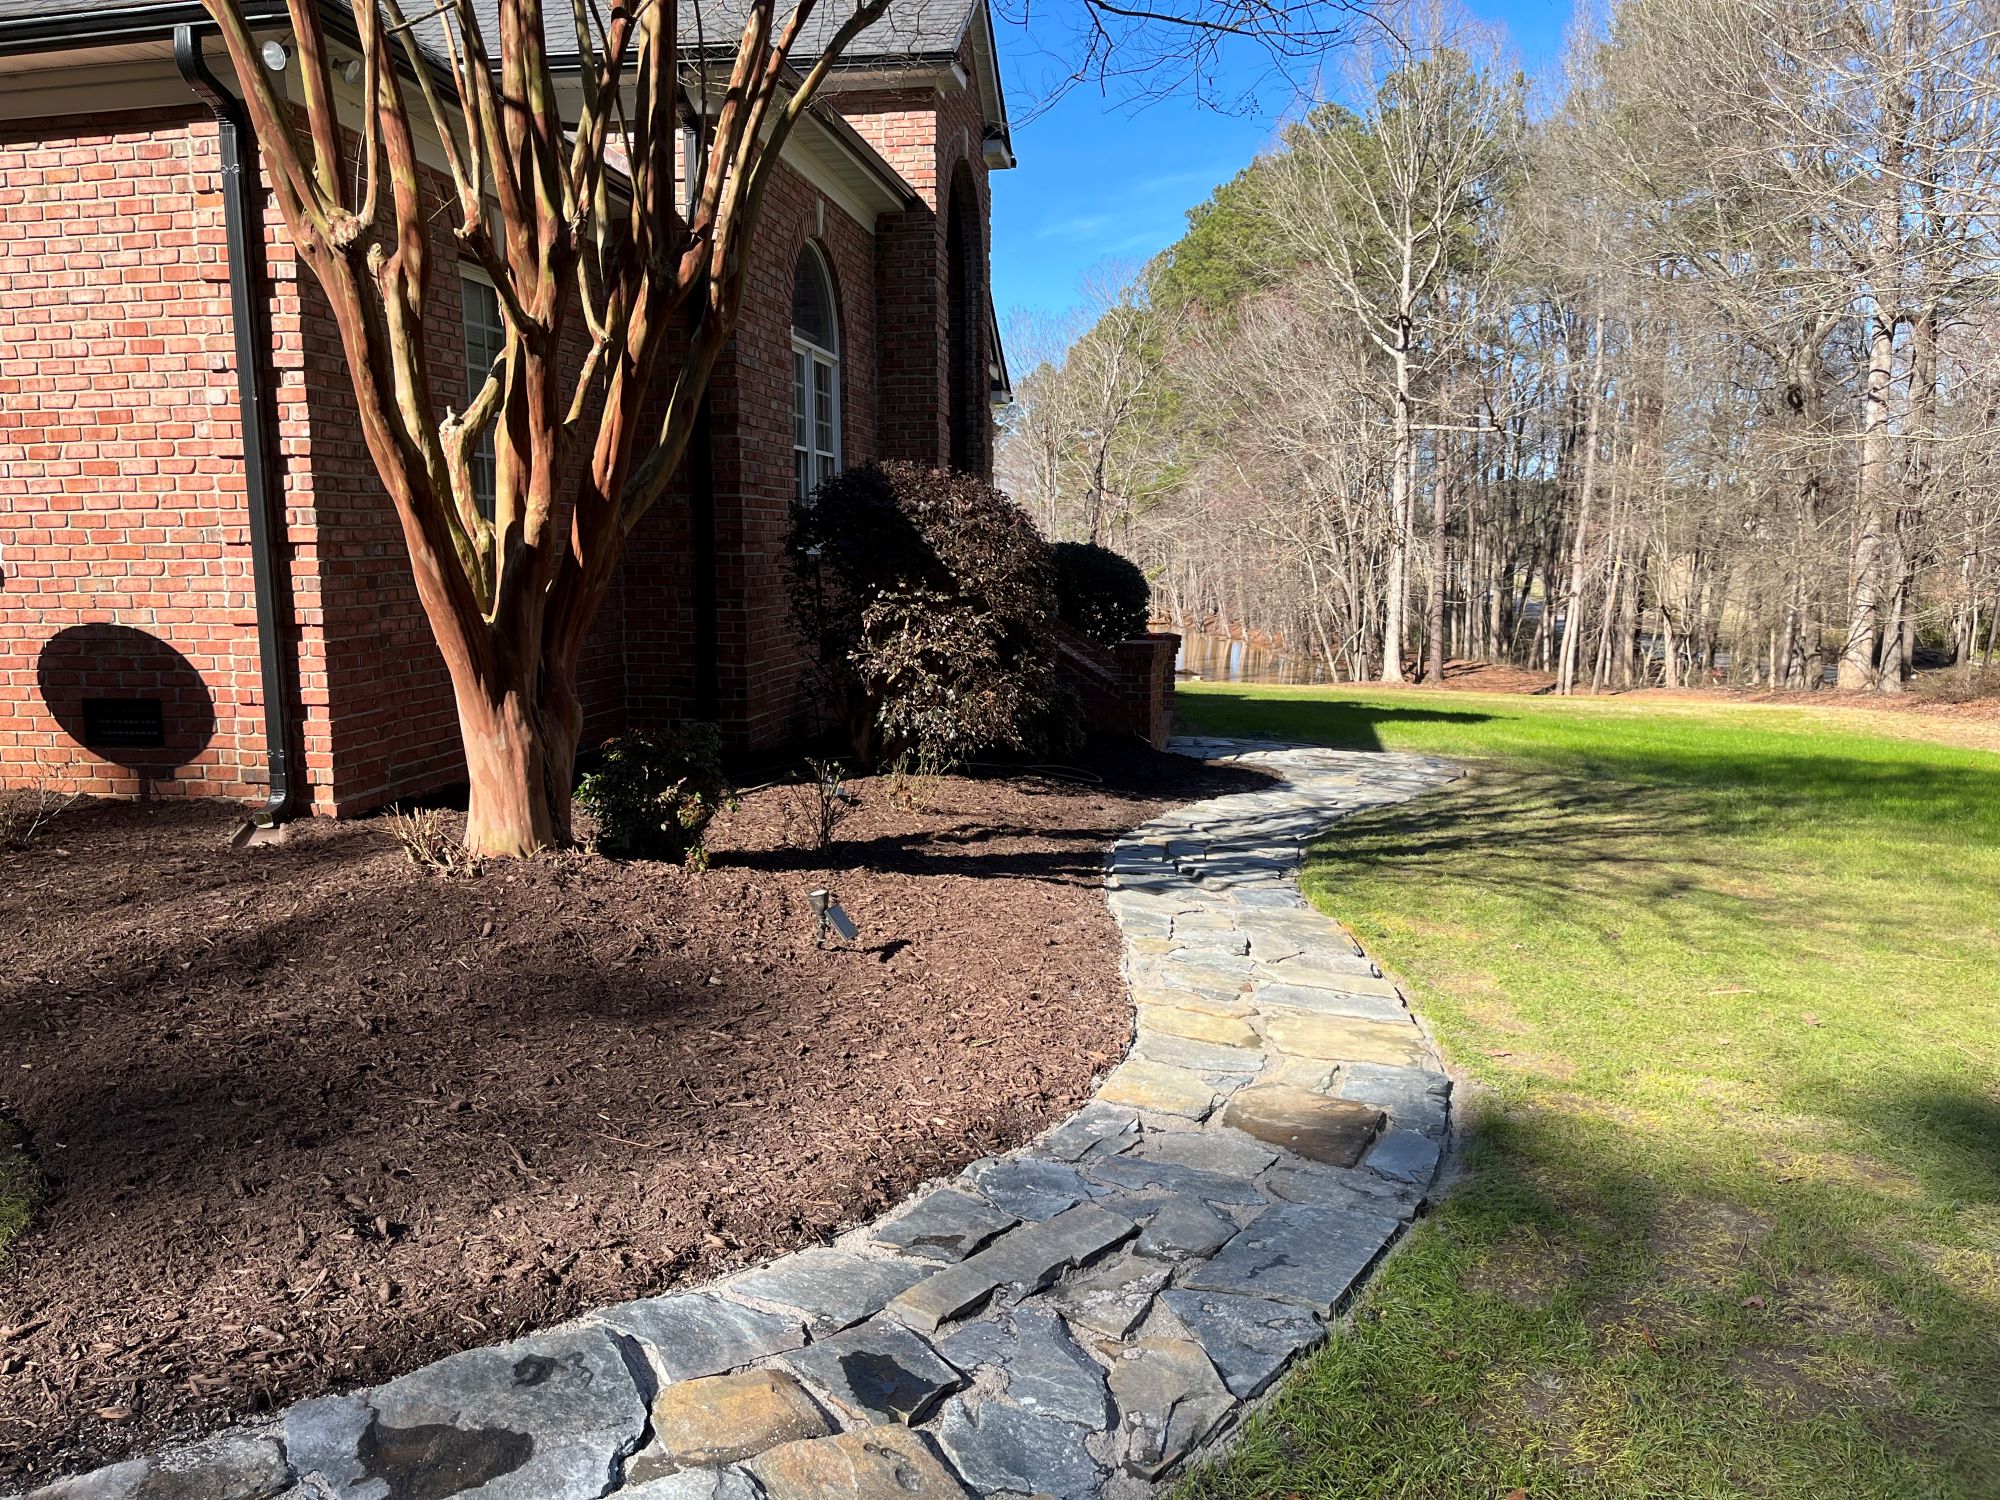 Turn your dream landscape into reality with Rudy's Landscape Design. Our skilled designers create customized outdoor spaces that reflect your style and preferences.